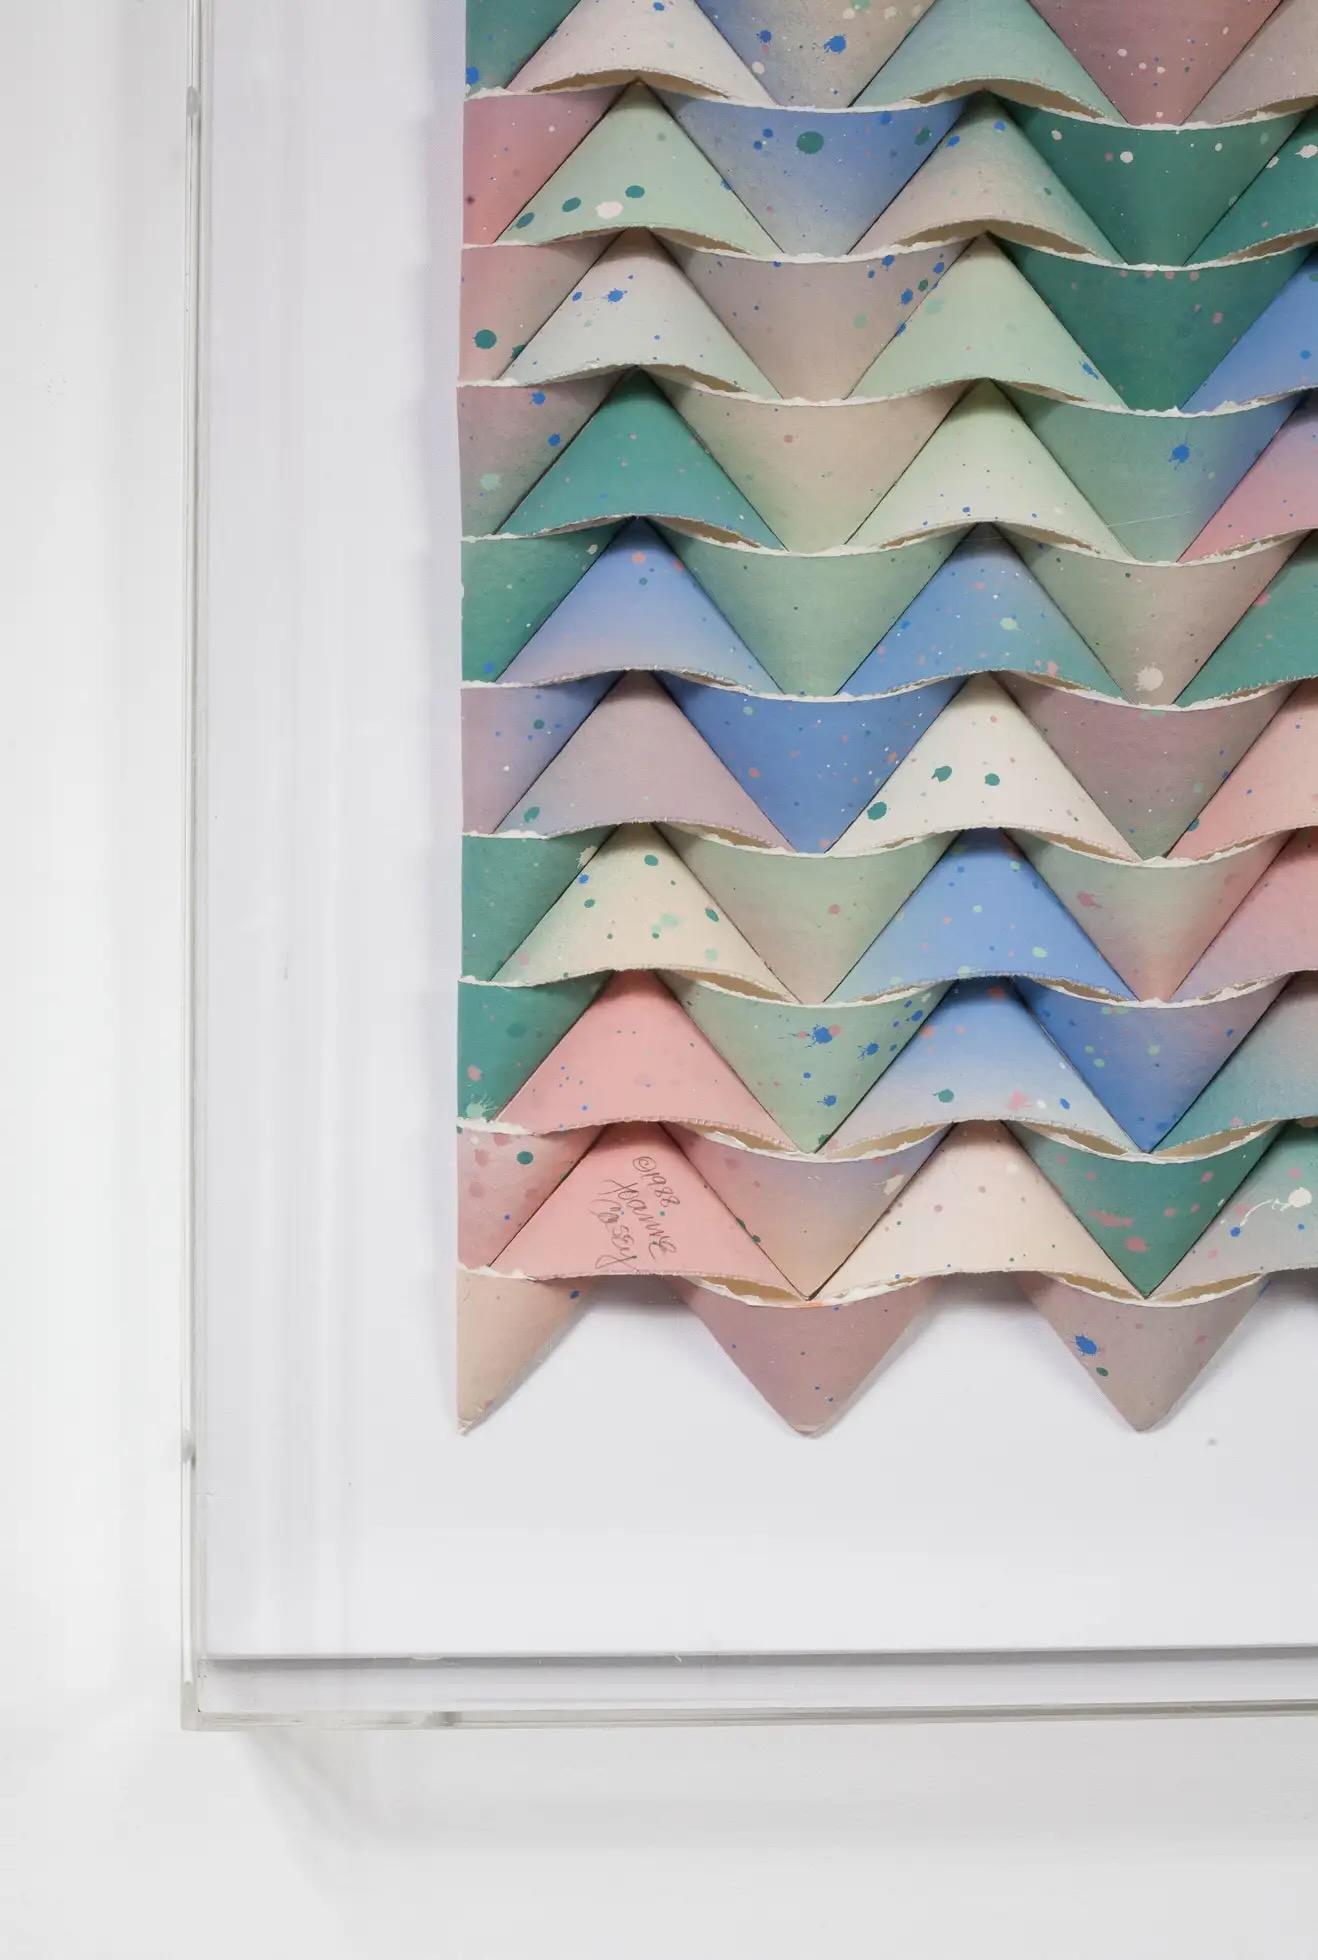 Contemporary French artist Joanne Casey paper abstract.
Rows of strips of pastel colored paper folded in undulating chevron pattern.
Strips are placed in opposite direction to create a more 3D effect.
Framed in lucite box.
Signed by the